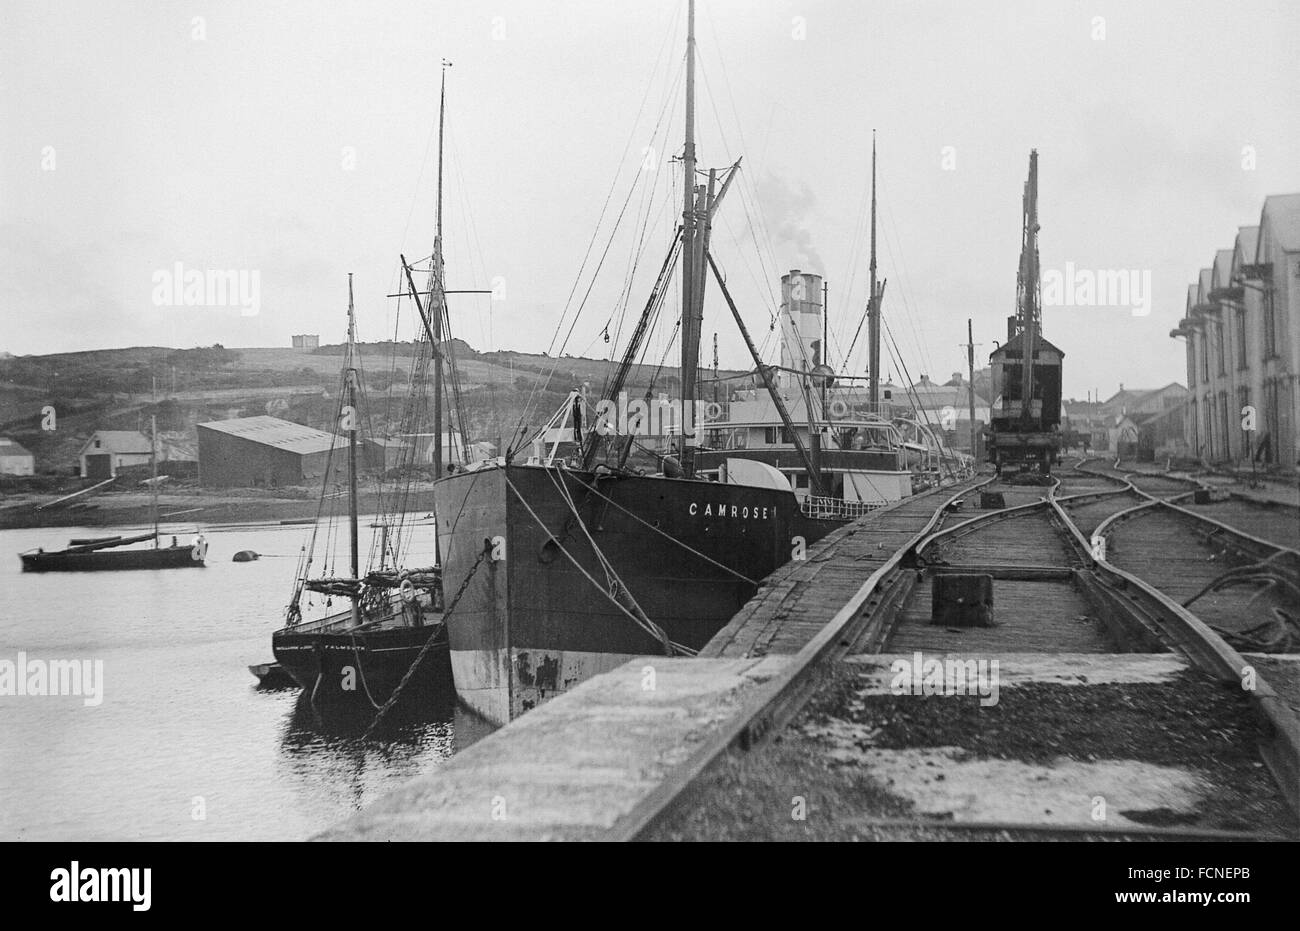 AJAXNETPHOTO.- 1920S APPROX. FALMOUTH, ENGLAND. - VIEW OF THE DOCKS WITH THE STEAM CARGO SHIP CAMROSE AND A FLAMOUTH REGISTERED SAILING SHIP MOORED ALONGSIDE.   PHOTO:AJAX VINTAGE PICTURE LIBRARY  REF:AVL SHI CAMROSE 1920 Stock Photo